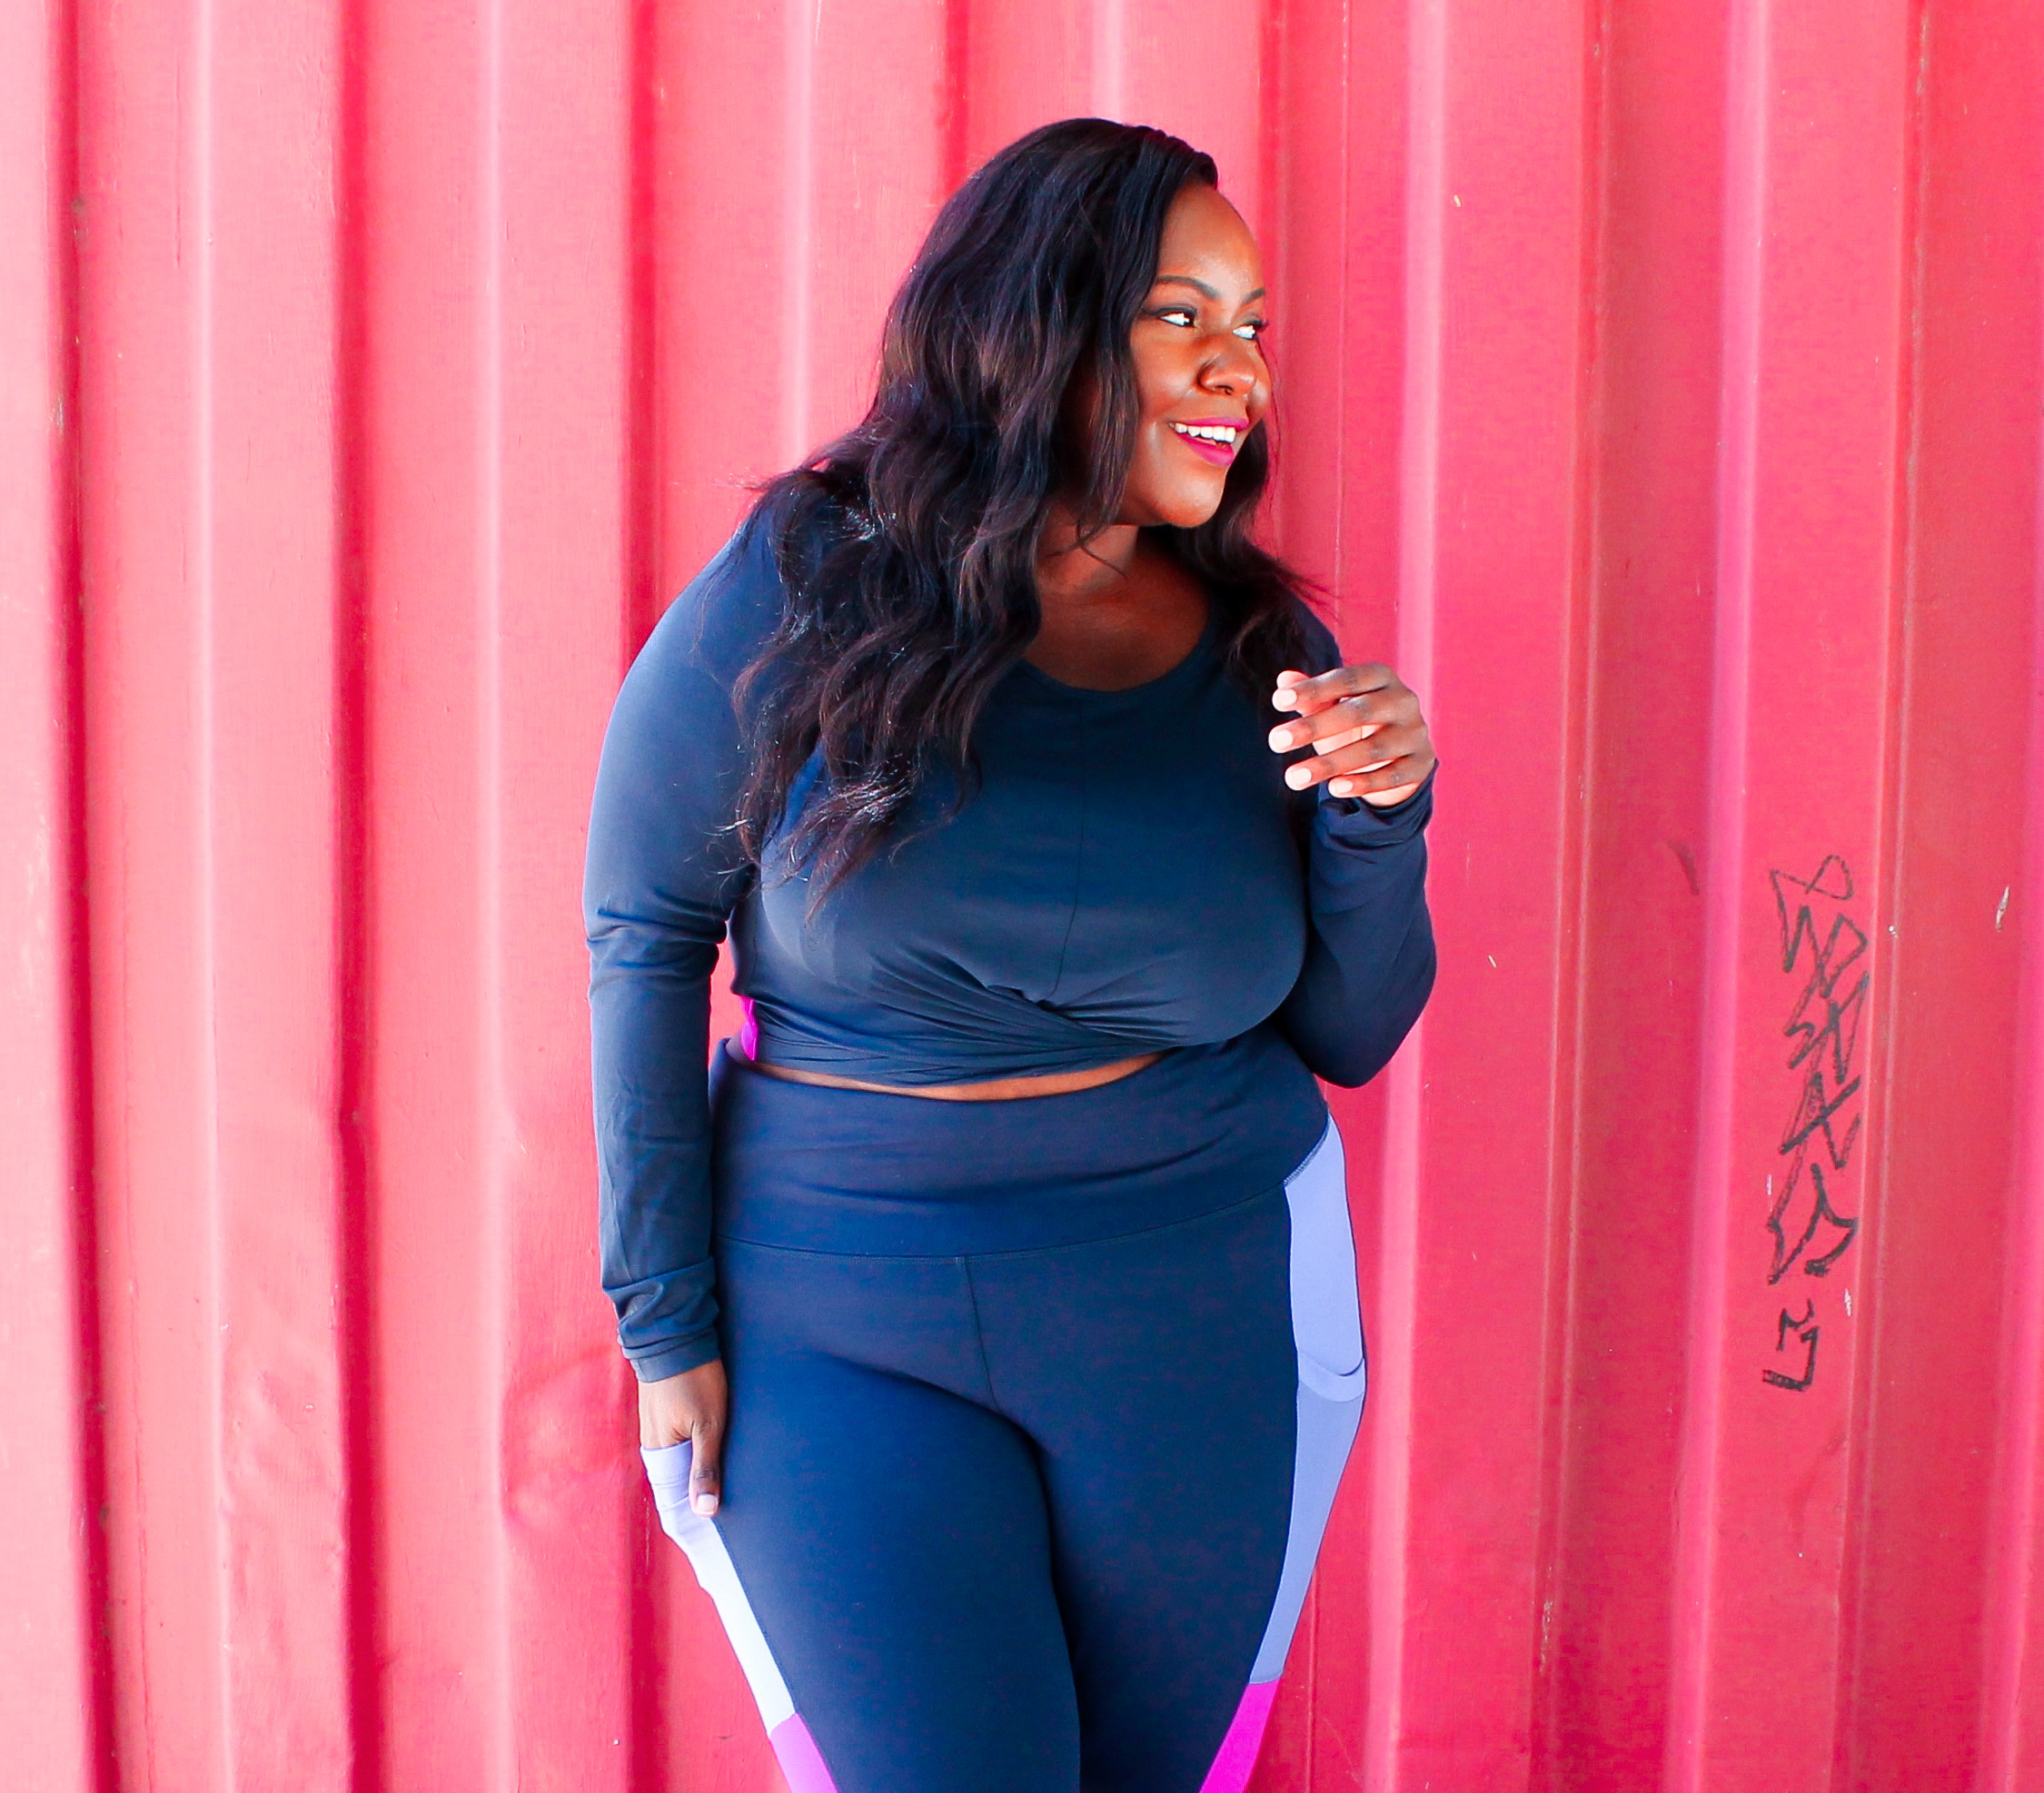 houston influencer, fabletics active, fabletics review plus size, move in fabletics, athleisure nike puma plus size fashion blogs 2019, beautiful curvy girls, beautiful plus size dark skin girls, plus size black bloggers, clothes for curvy girls, curvy girl fashion clothing, plus blog, plus size fashion tips, plus size women blog, curvy women fashion, plus blog, curvy girl fashion blog, style plus curves, plus size fashion instagram, curvy girl blog, bbw blog, plus size street fashion, plus size beauty blog, plus size fashion ideas, curvy girl summer outfits, plus size fashion magazine, plus fashion bloggers, zara